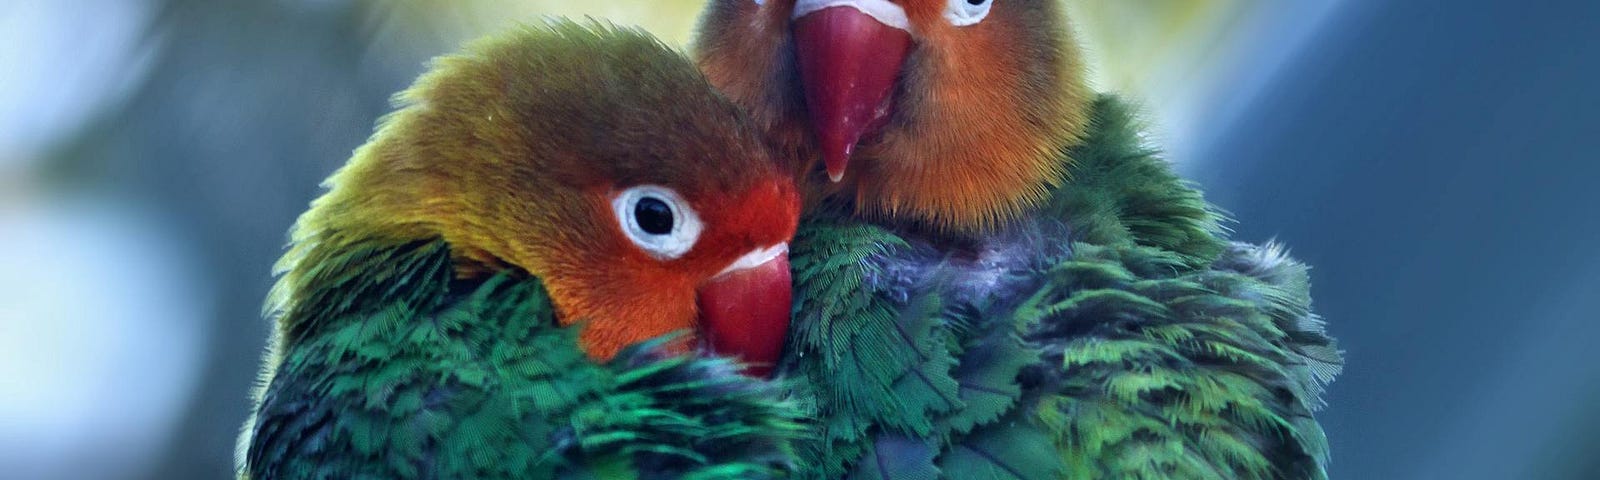 A pair of Fischer’s Lovebirds roosting together.